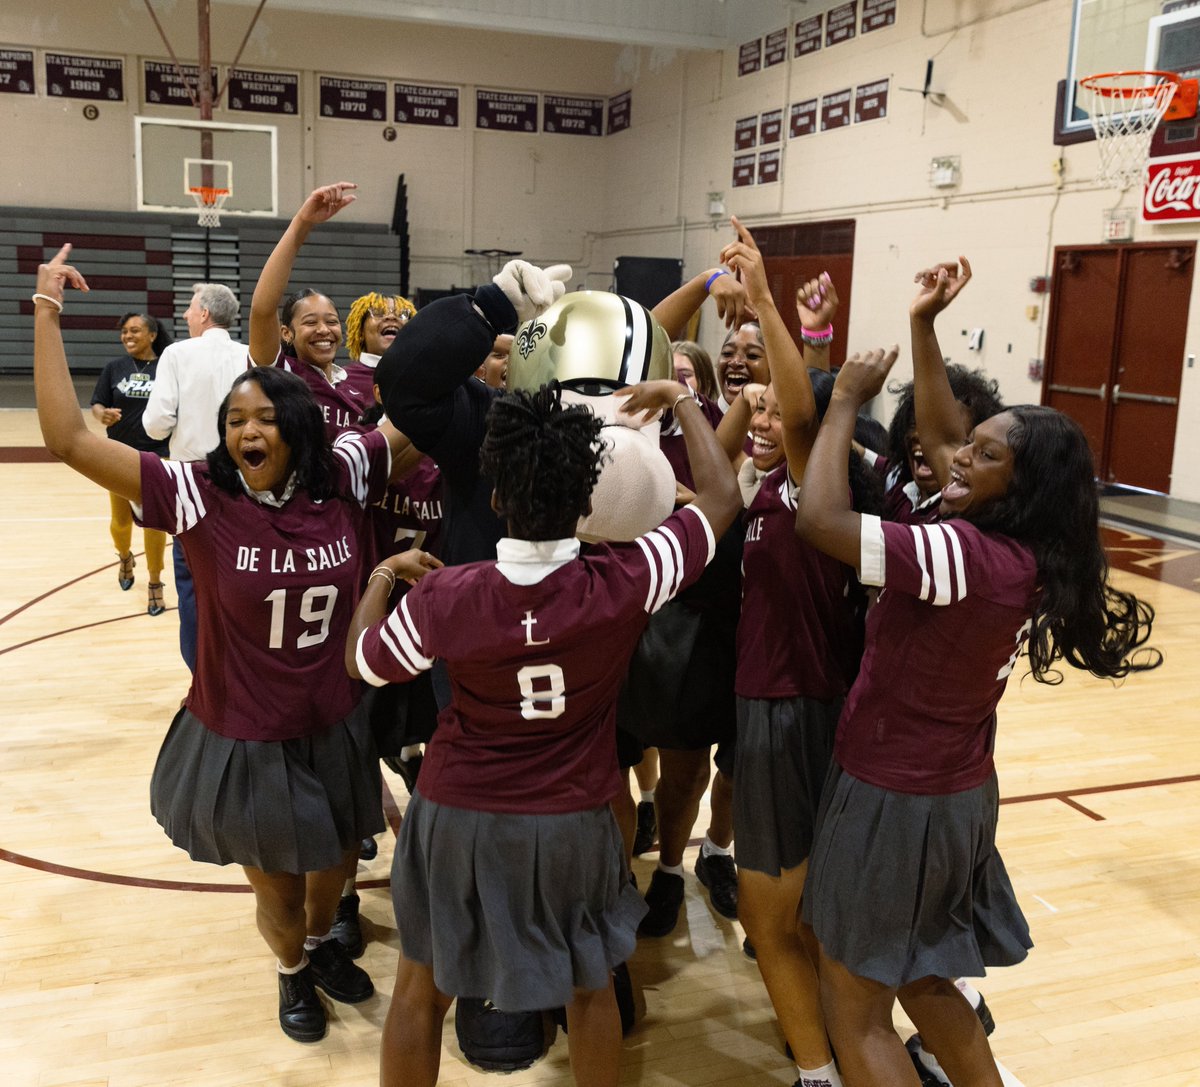 We hosted a High School Football Celebration at De La Salle for the Girls Flag Football team and the student body to celebrate the team's championship⚜️ Check out the gallery ➡️neworlns.co/4bFc4iE